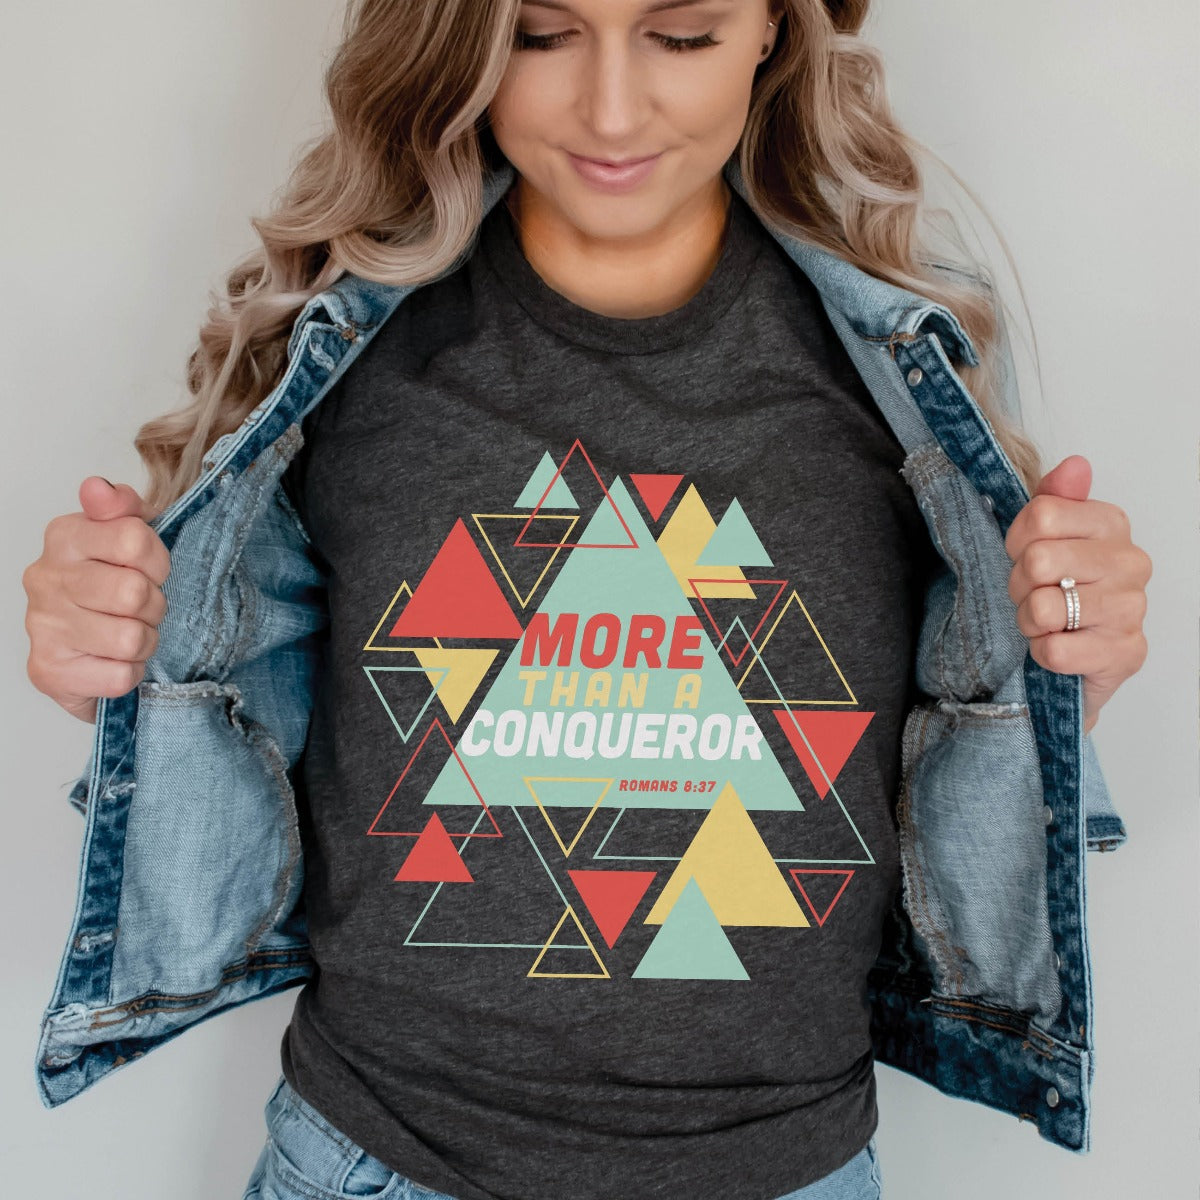 Modern young woman wearing a heather dark gray "More Than A Conqueror" Romans 8:37 bible verse scripture unisex faith-based Christian Bella Canvas 3001 t-shirt, with bright and colorful geometric triangles pattern, made in the USA for Men and Women Jesus believers